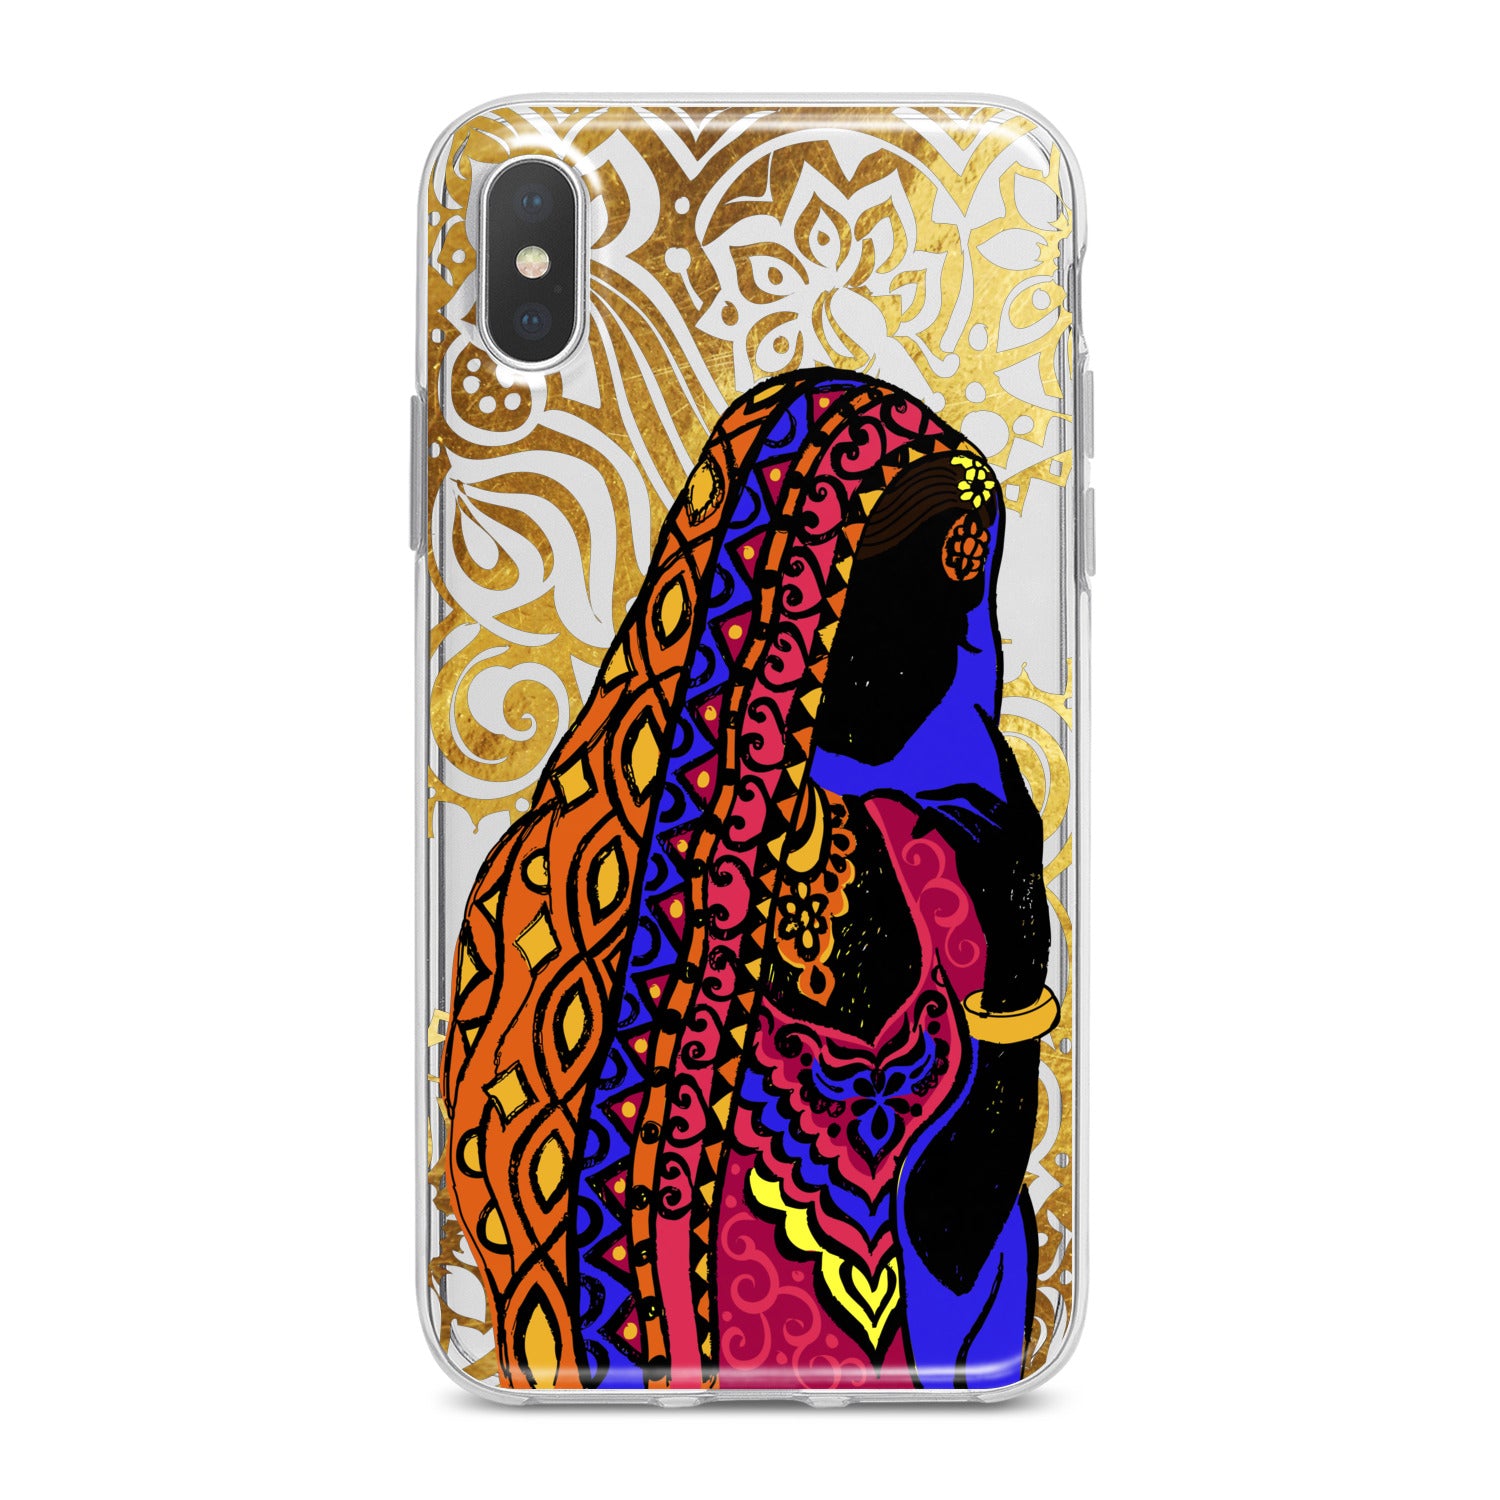 Lex Altern Indian Woman Phone Case for your iPhone & Android phone.